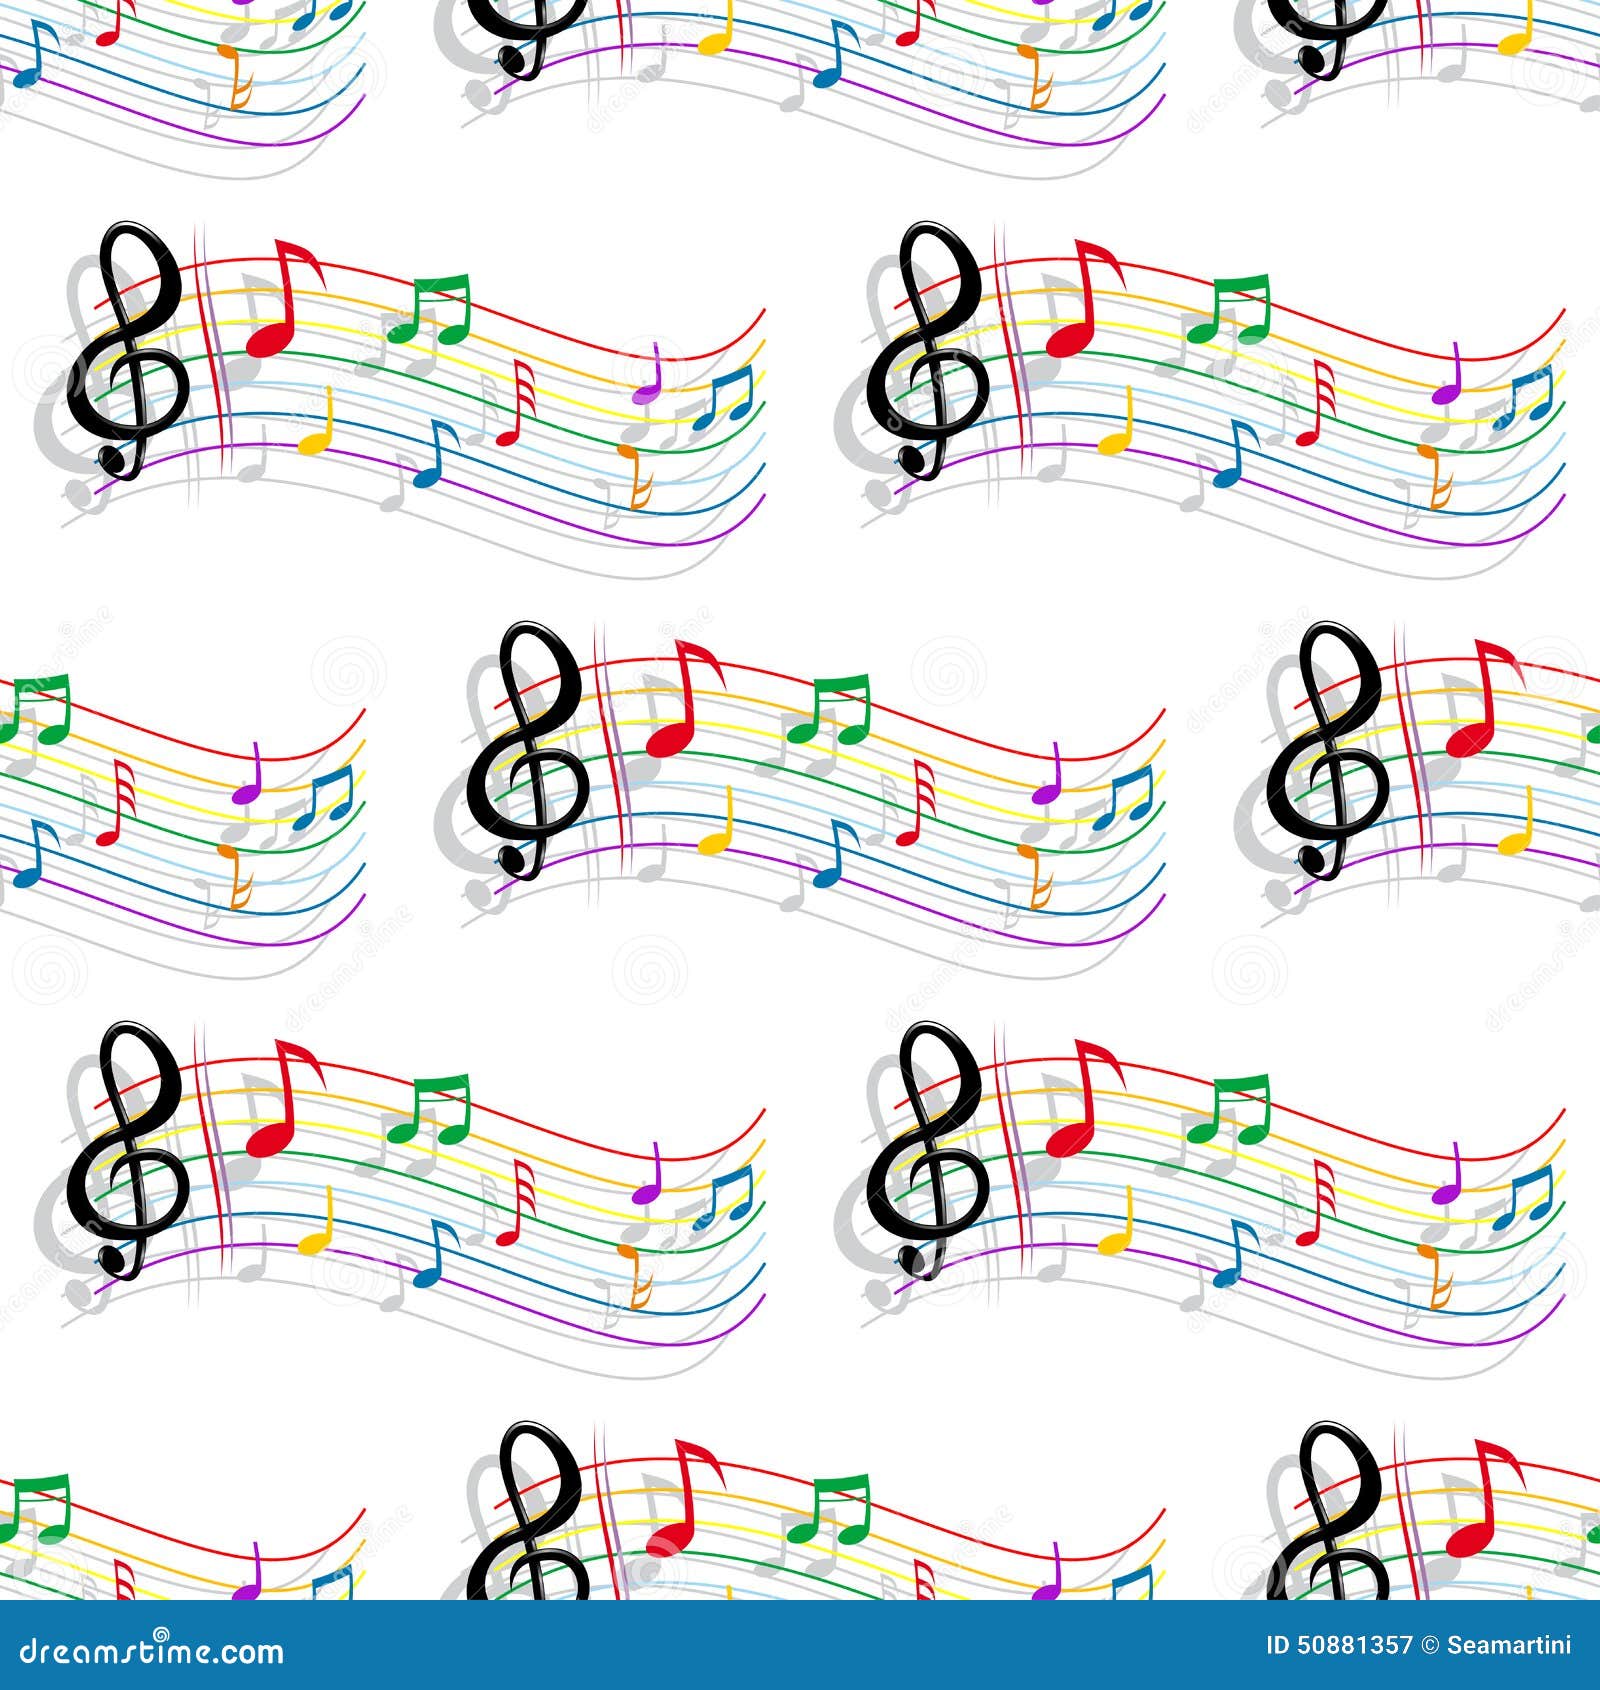 Seamless colorful music notes pattern. Seamless colorful curved staves, notes and treble clef background pattern with shadows for music and art concept design